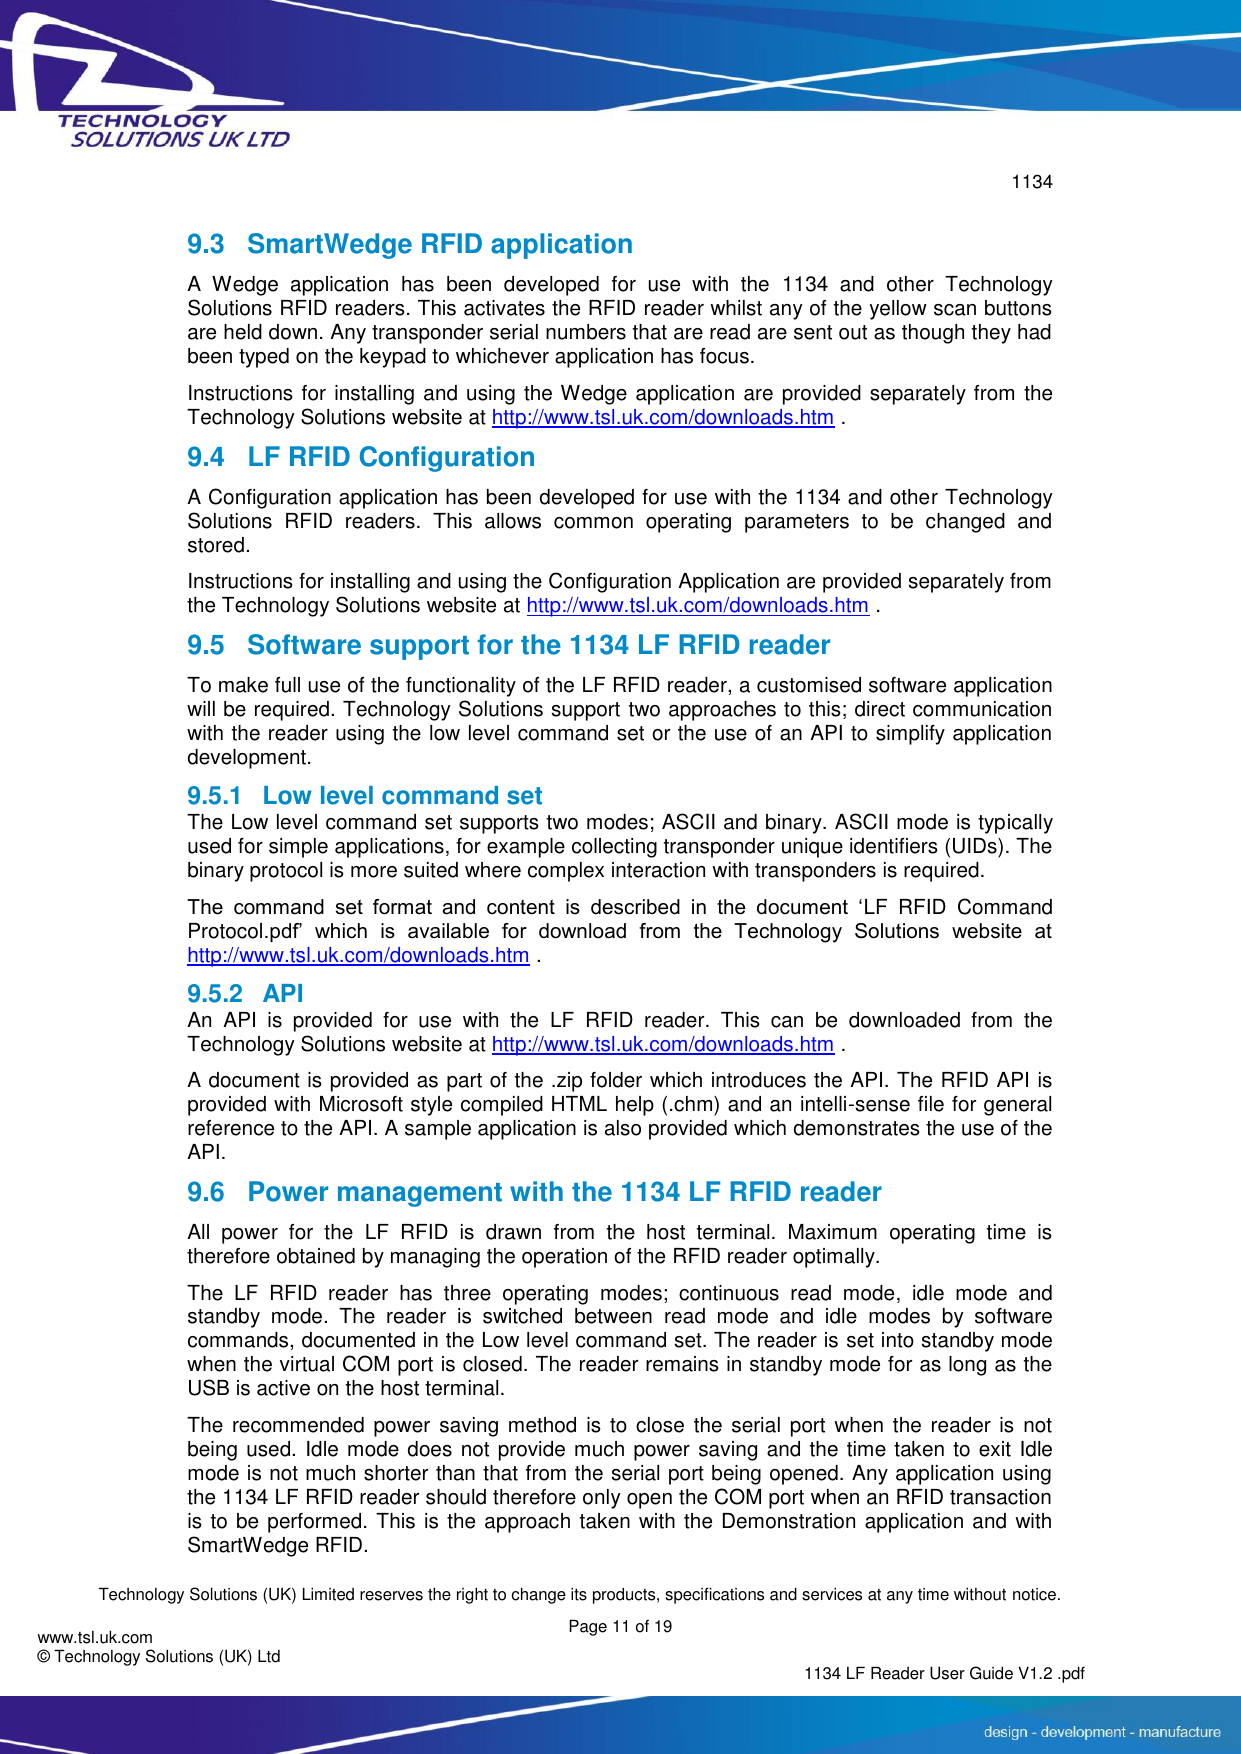        1134  Technology Solutions (UK) Limited reserves the right to change its products, specifications and services at any time without notice.   Page 11 of 19 1134 LF Reader User Guide V1.2 .pdf www.tsl.uk.com © Technology Solutions (UK) Ltd  9.3  SmartWedge RFID application A  Wedge  application  has  been  developed  for  use  with  the  1134  and  other  Technology Solutions RFID readers. This activates the RFID reader whilst any of the yellow scan buttons are held down. Any transponder serial numbers that are read are sent out as though they had been typed on the keypad to whichever application has focus. Instructions for installing and using the Wedge application are provided separately from the Technology Solutions website at http://www.tsl.uk.com/downloads.htm . 9.4 LF RFID Configuration A Configuration application has been developed for use with the 1134 and other Technology Solutions  RFID  readers.  This  allows  common  operating  parameters  to  be  changed  and stored. Instructions for installing and using the Configuration Application are provided separately from the Technology Solutions website at http://www.tsl.uk.com/downloads.htm . 9.5  Software support for the 1134 LF RFID reader To make full use of the functionality of the LF RFID reader, a customised software application will be required. Technology Solutions support two approaches to this; direct communication with the reader using the low level command set or the use of an API to simplify application development.  9.5.1  Low level command set The Low level command set supports two modes; ASCII and binary. ASCII mode is typically used for simple applications, for example collecting transponder unique identifiers (UIDs). The binary protocol is more suited where complex interaction with transponders is required. The  command  set  format  and  content  is  described  in  the  document  ‘LF  RFID  Command Protocol.pdf’  which  is  available  for  download  from  the  Technology  Solutions  website  at http://www.tsl.uk.com/downloads.htm . 9.5.2  API An  API  is  provided  for  use  with  the  LF  RFID  reader.  This  can  be  downloaded  from  the Technology Solutions website at http://www.tsl.uk.com/downloads.htm . A document is provided as part of the .zip folder which introduces the API. The RFID API is provided with Microsoft style compiled HTML help (.chm) and an intelli-sense file for general reference to the API. A sample application is also provided which demonstrates the use of the API. 9.6  Power management with the 1134 LF RFID reader All  power  for  the  LF  RFID  is  drawn  from  the  host  terminal.  Maximum  operating  time  is therefore obtained by managing the operation of the RFID reader optimally. The  LF  RFID  reader  has  three  operating  modes;  continuous  read  mode,  idle  mode  and standby  mode.  The  reader  is  switched  between  read  mode  and  idle  modes  by  software commands, documented in the Low level command set. The reader is set into standby mode when the virtual COM port is closed. The reader remains in standby mode for as long as the USB is active on the host terminal. The recommended power  saving  method  is  to close the serial  port  when the reader  is  not being used. Idle mode does not provide much power saving and the time taken to exit Idle mode is not much shorter than that from the serial port being opened. Any application using the 1134 LF RFID reader should therefore only open the COM port when an RFID transaction is to be performed. This is the approach taken with the Demonstration application and with SmartWedge RFID.   